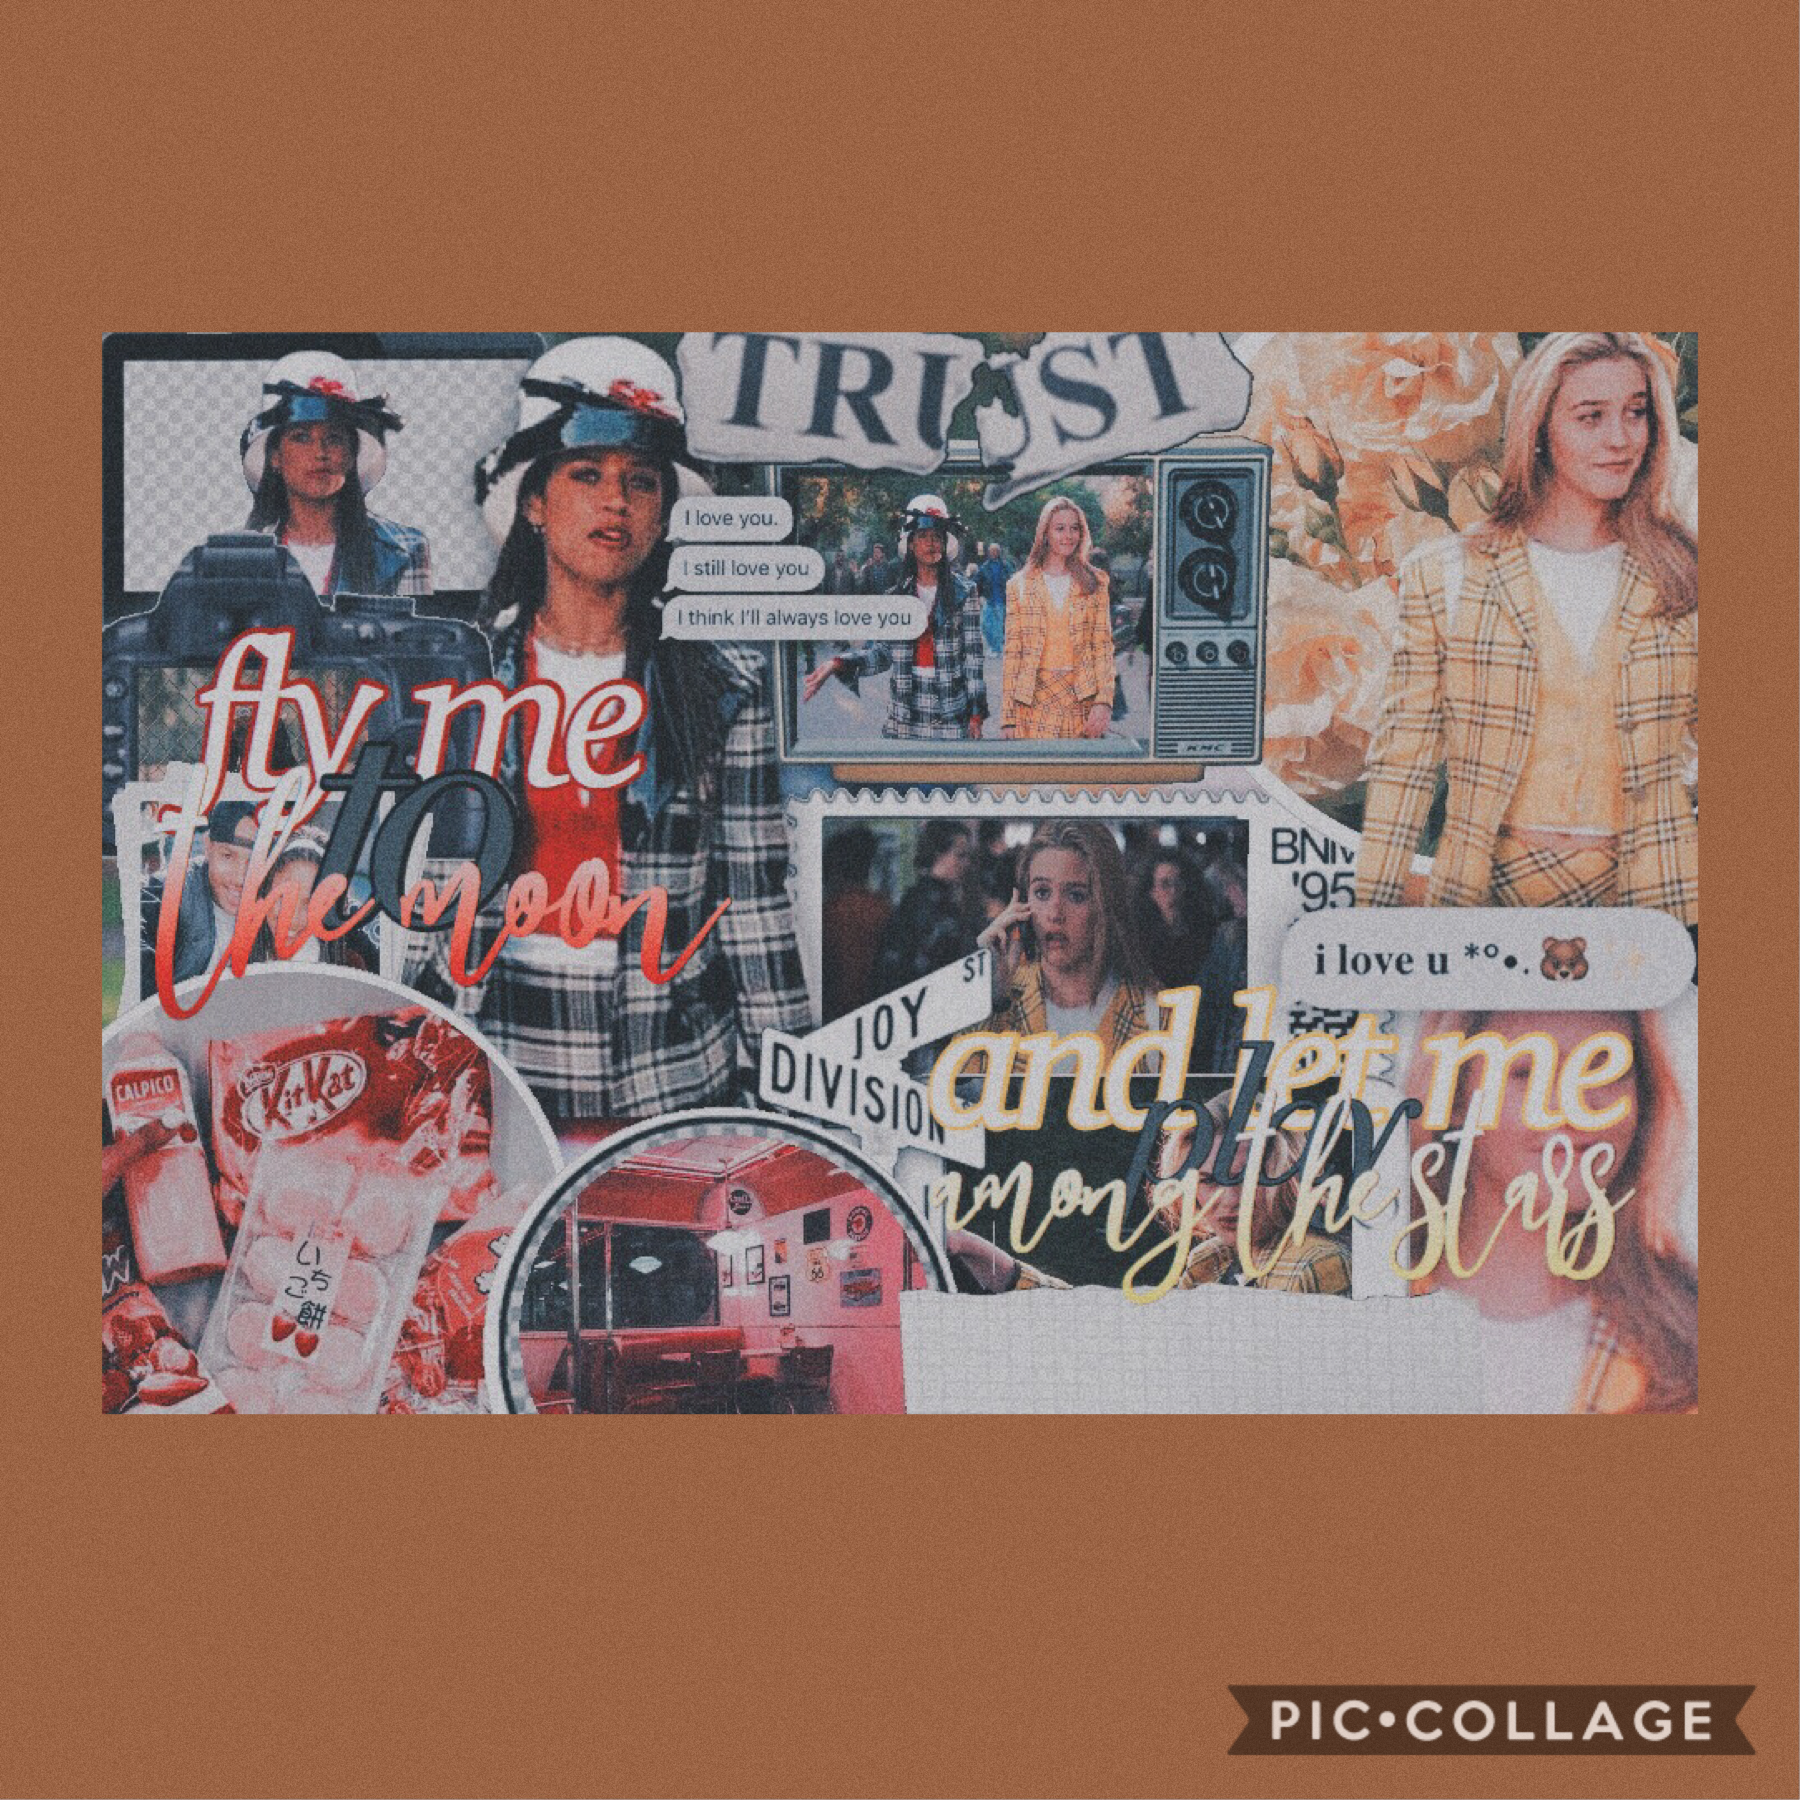 okkkk hiii- it’s been a while since I posted anything haha but here’s an edit of Cher and Dionne from the movie Clueless! 